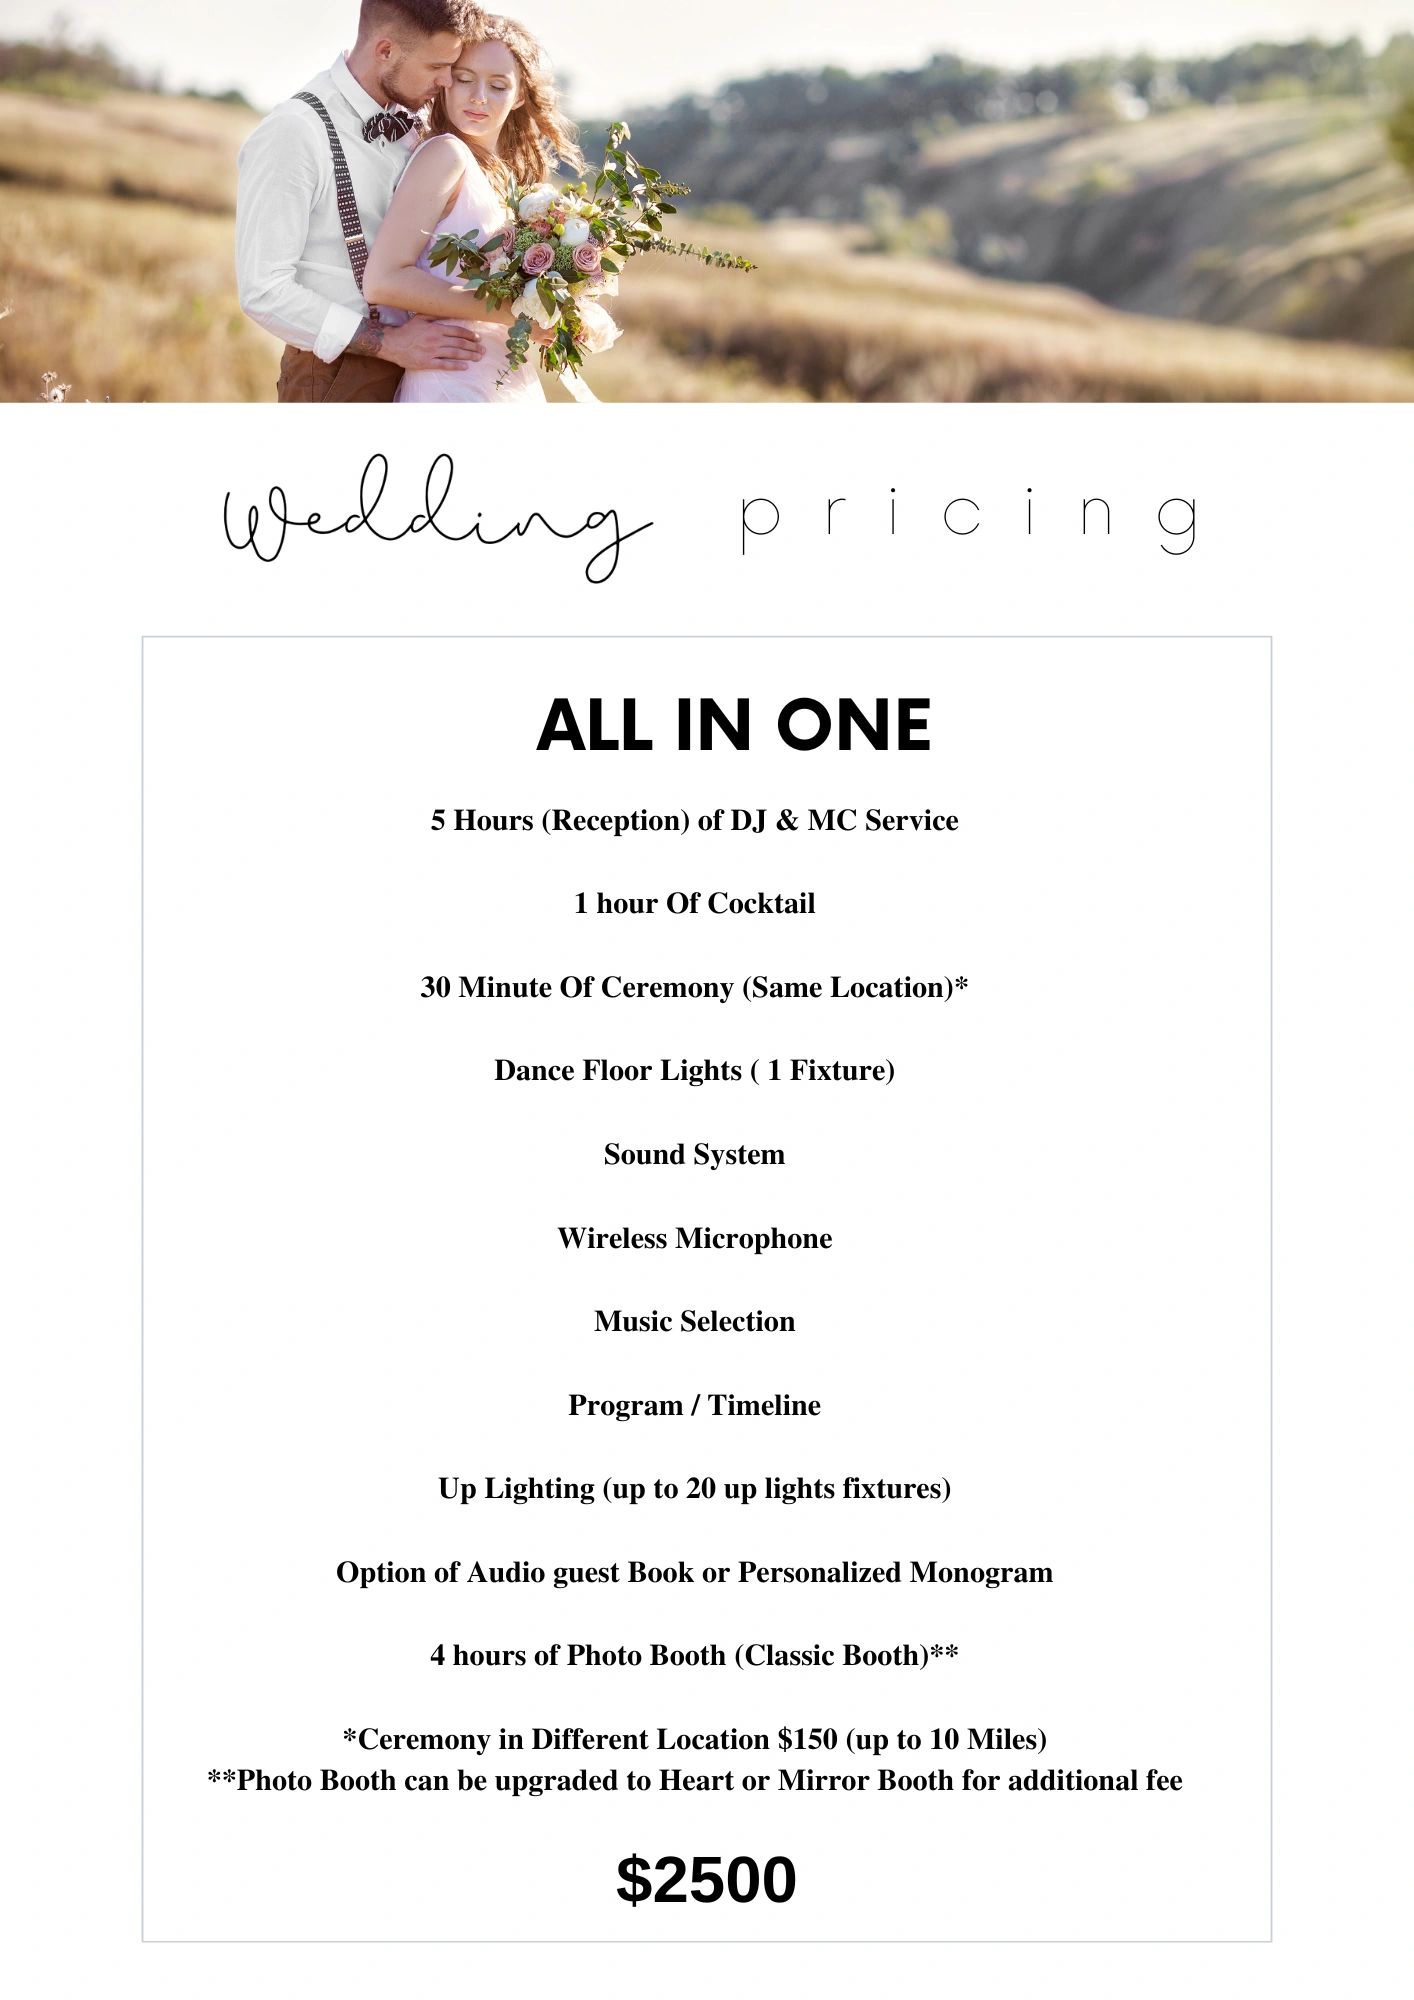 All in One Wedding DJ Packages